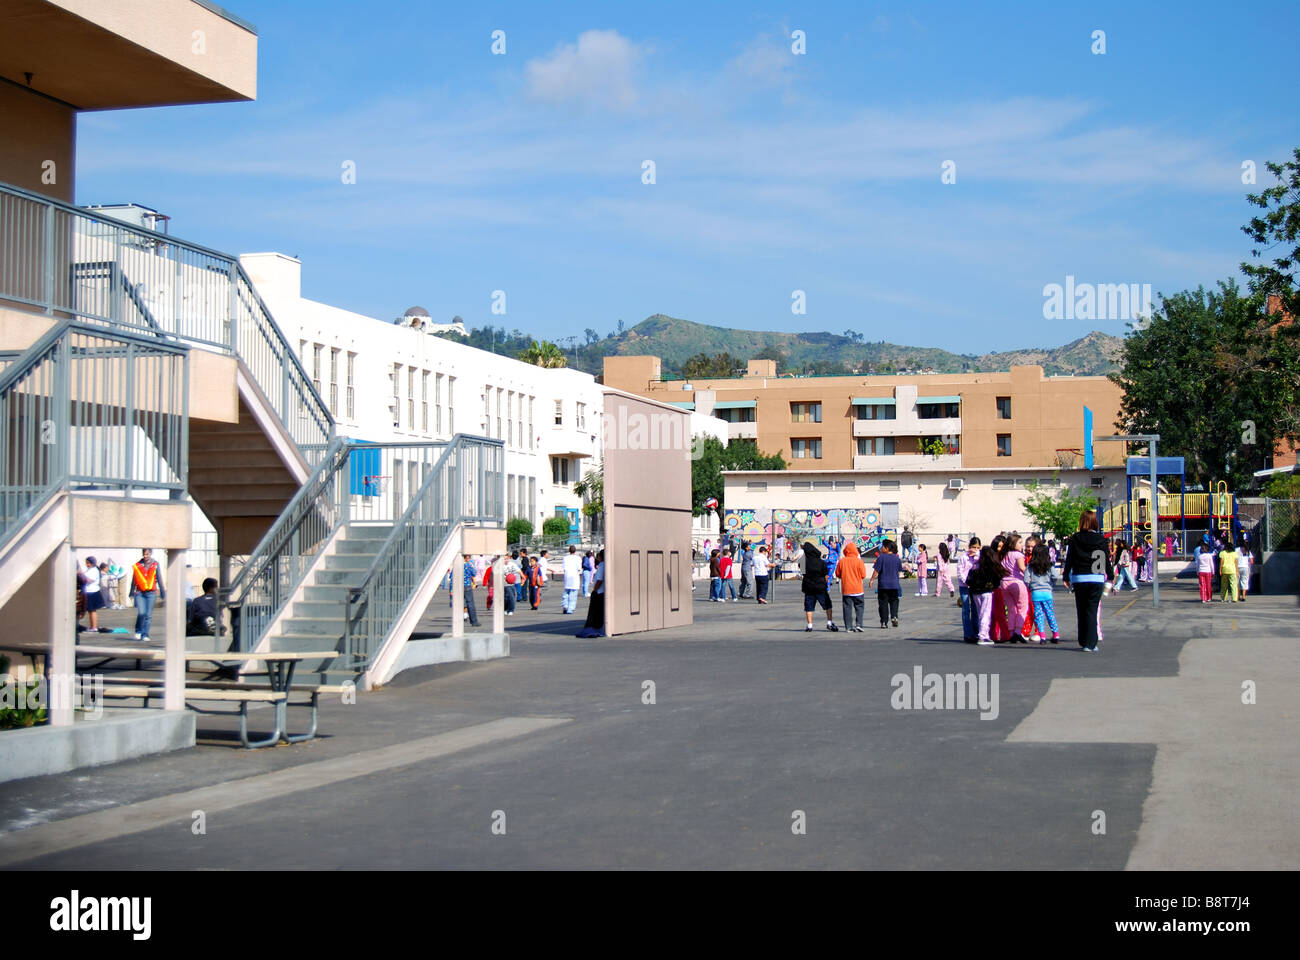 Junior State School, Hollywood Boulevard, Hollywood, Los Angeles, California, United States of America Stock Photo